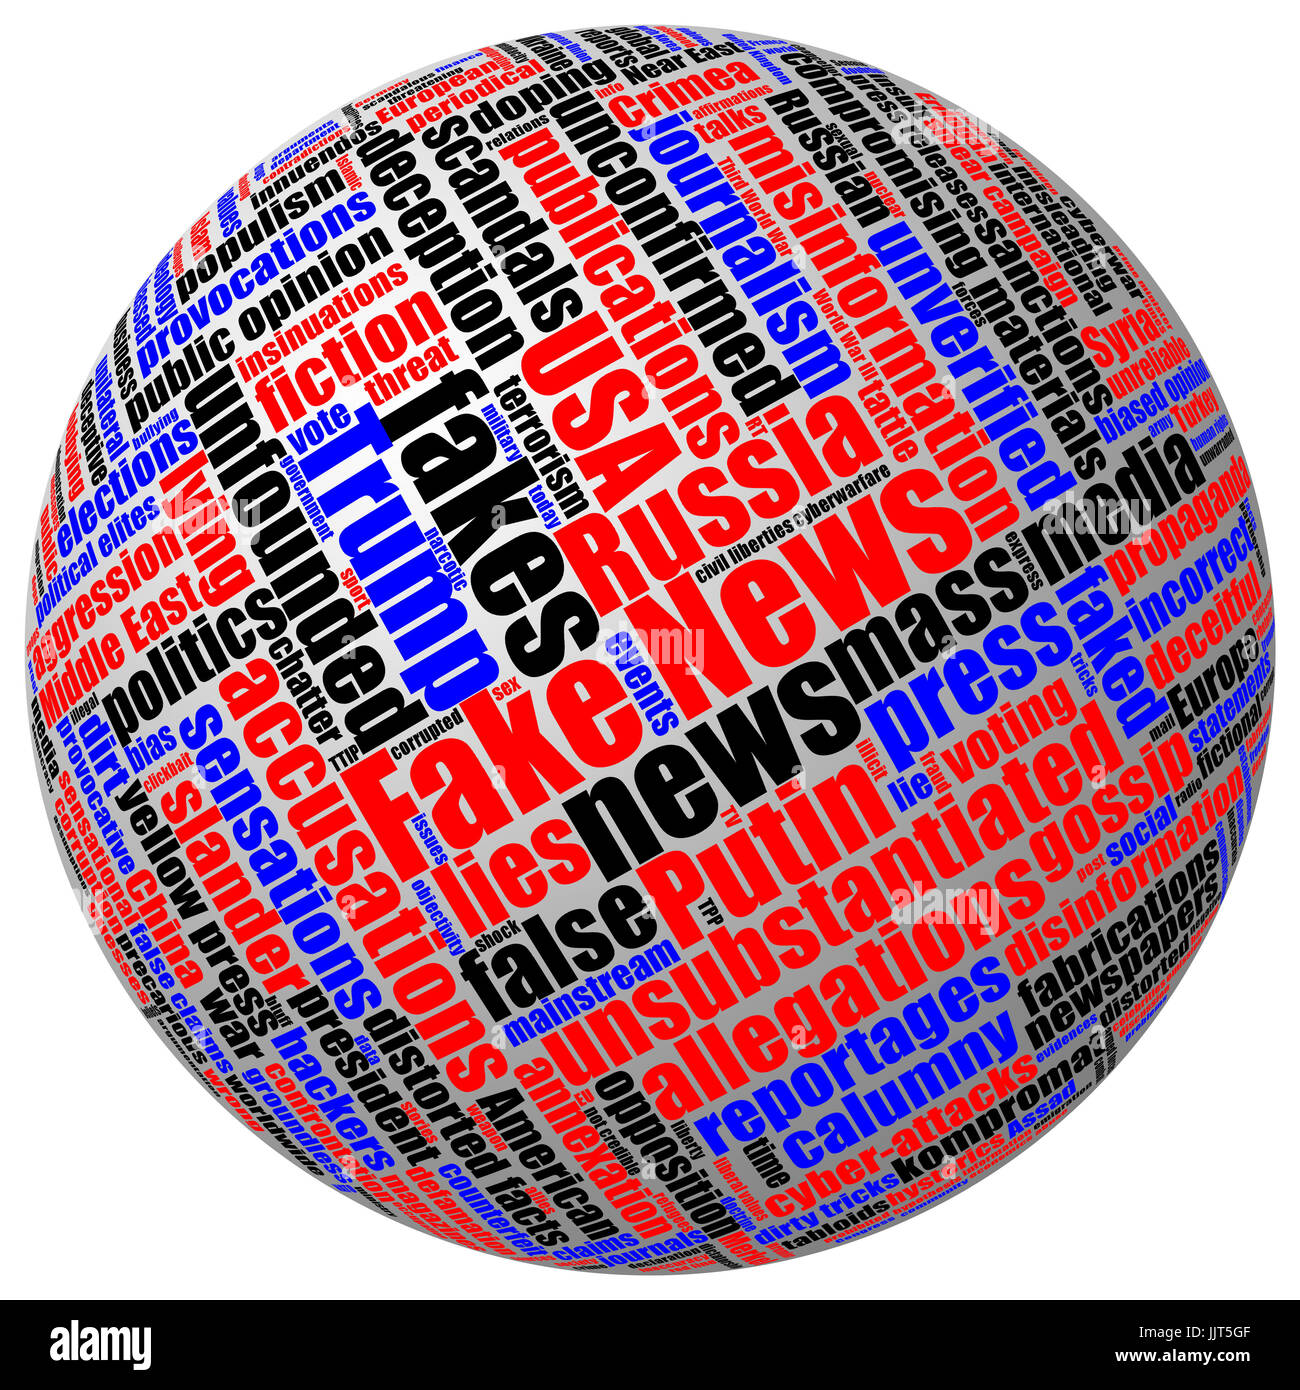 Three-dimensional 3D ball with colored fake news tag word cloud isolated on white Stock Photo